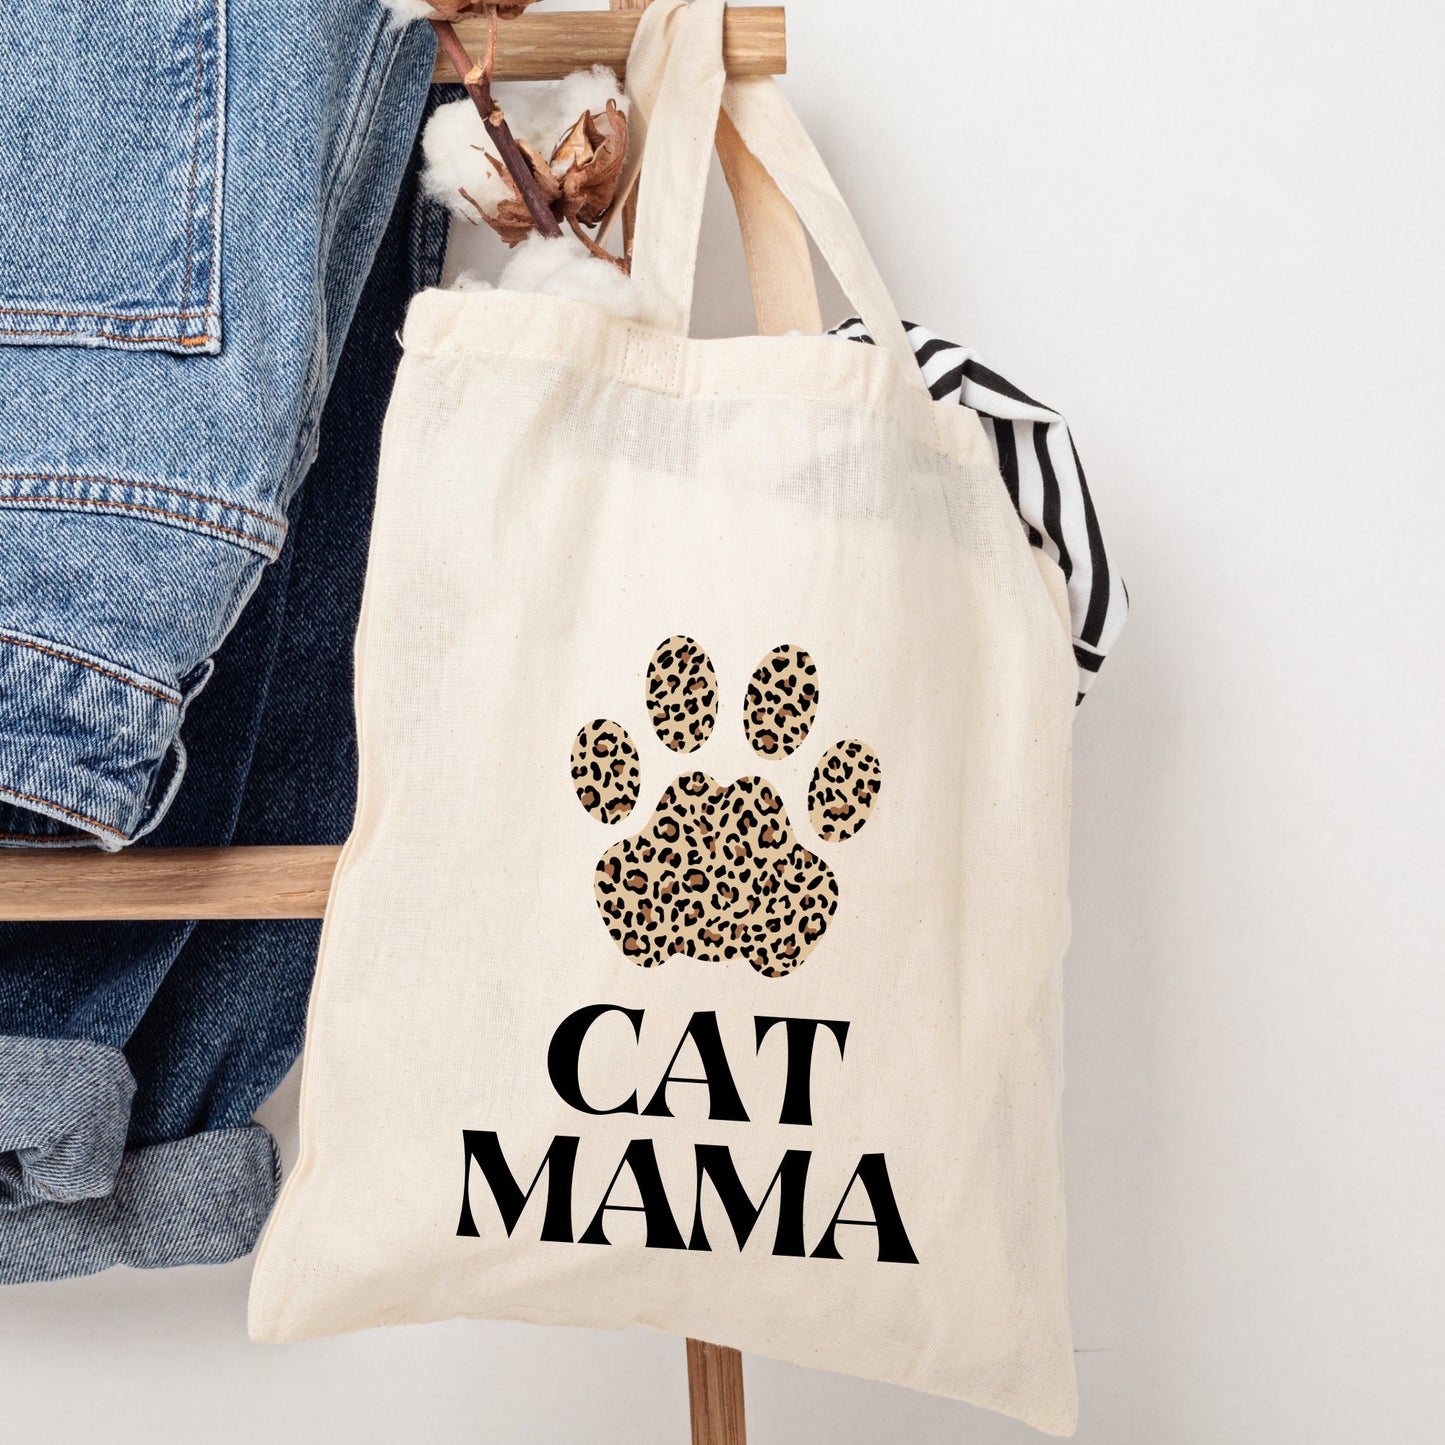 Cat Mama tote bag, Leopard print paw, Christmas gift cat mum, reusable cotton canvas shopping bag, Christmas gift for cat owners